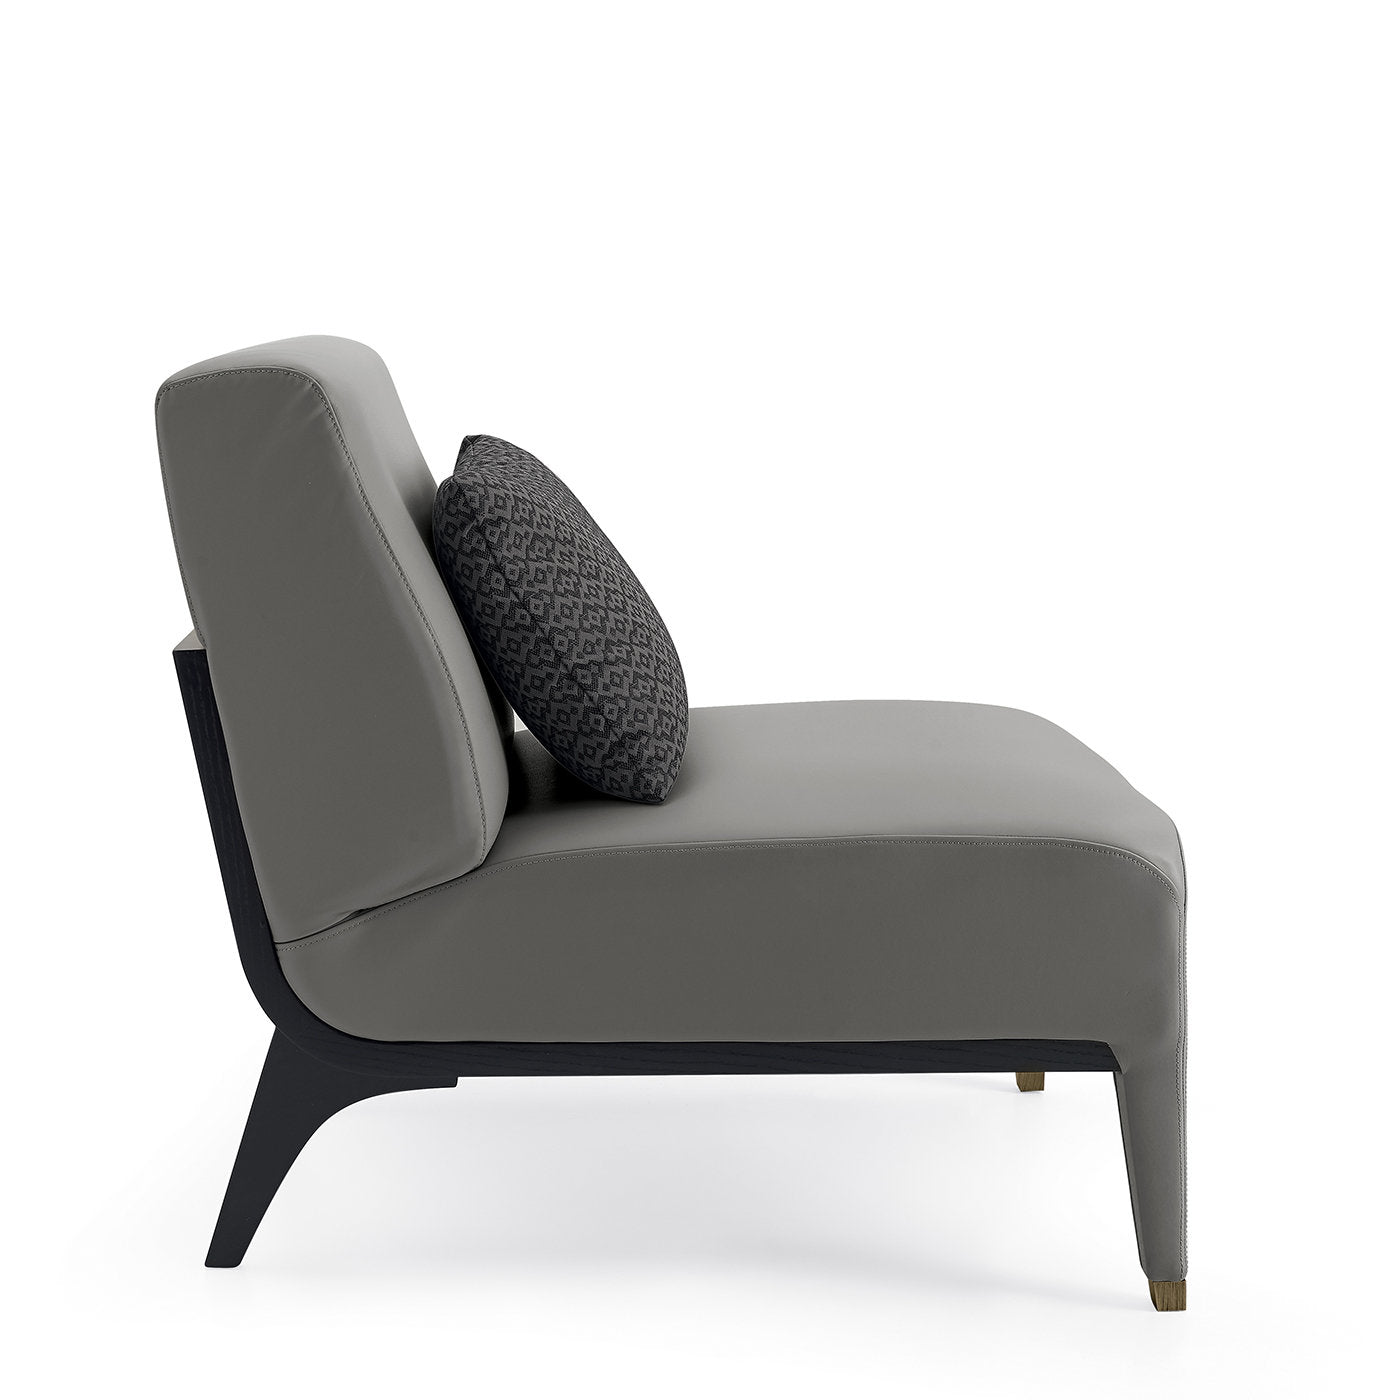 Gray Leather Armchair - Alternative view 1